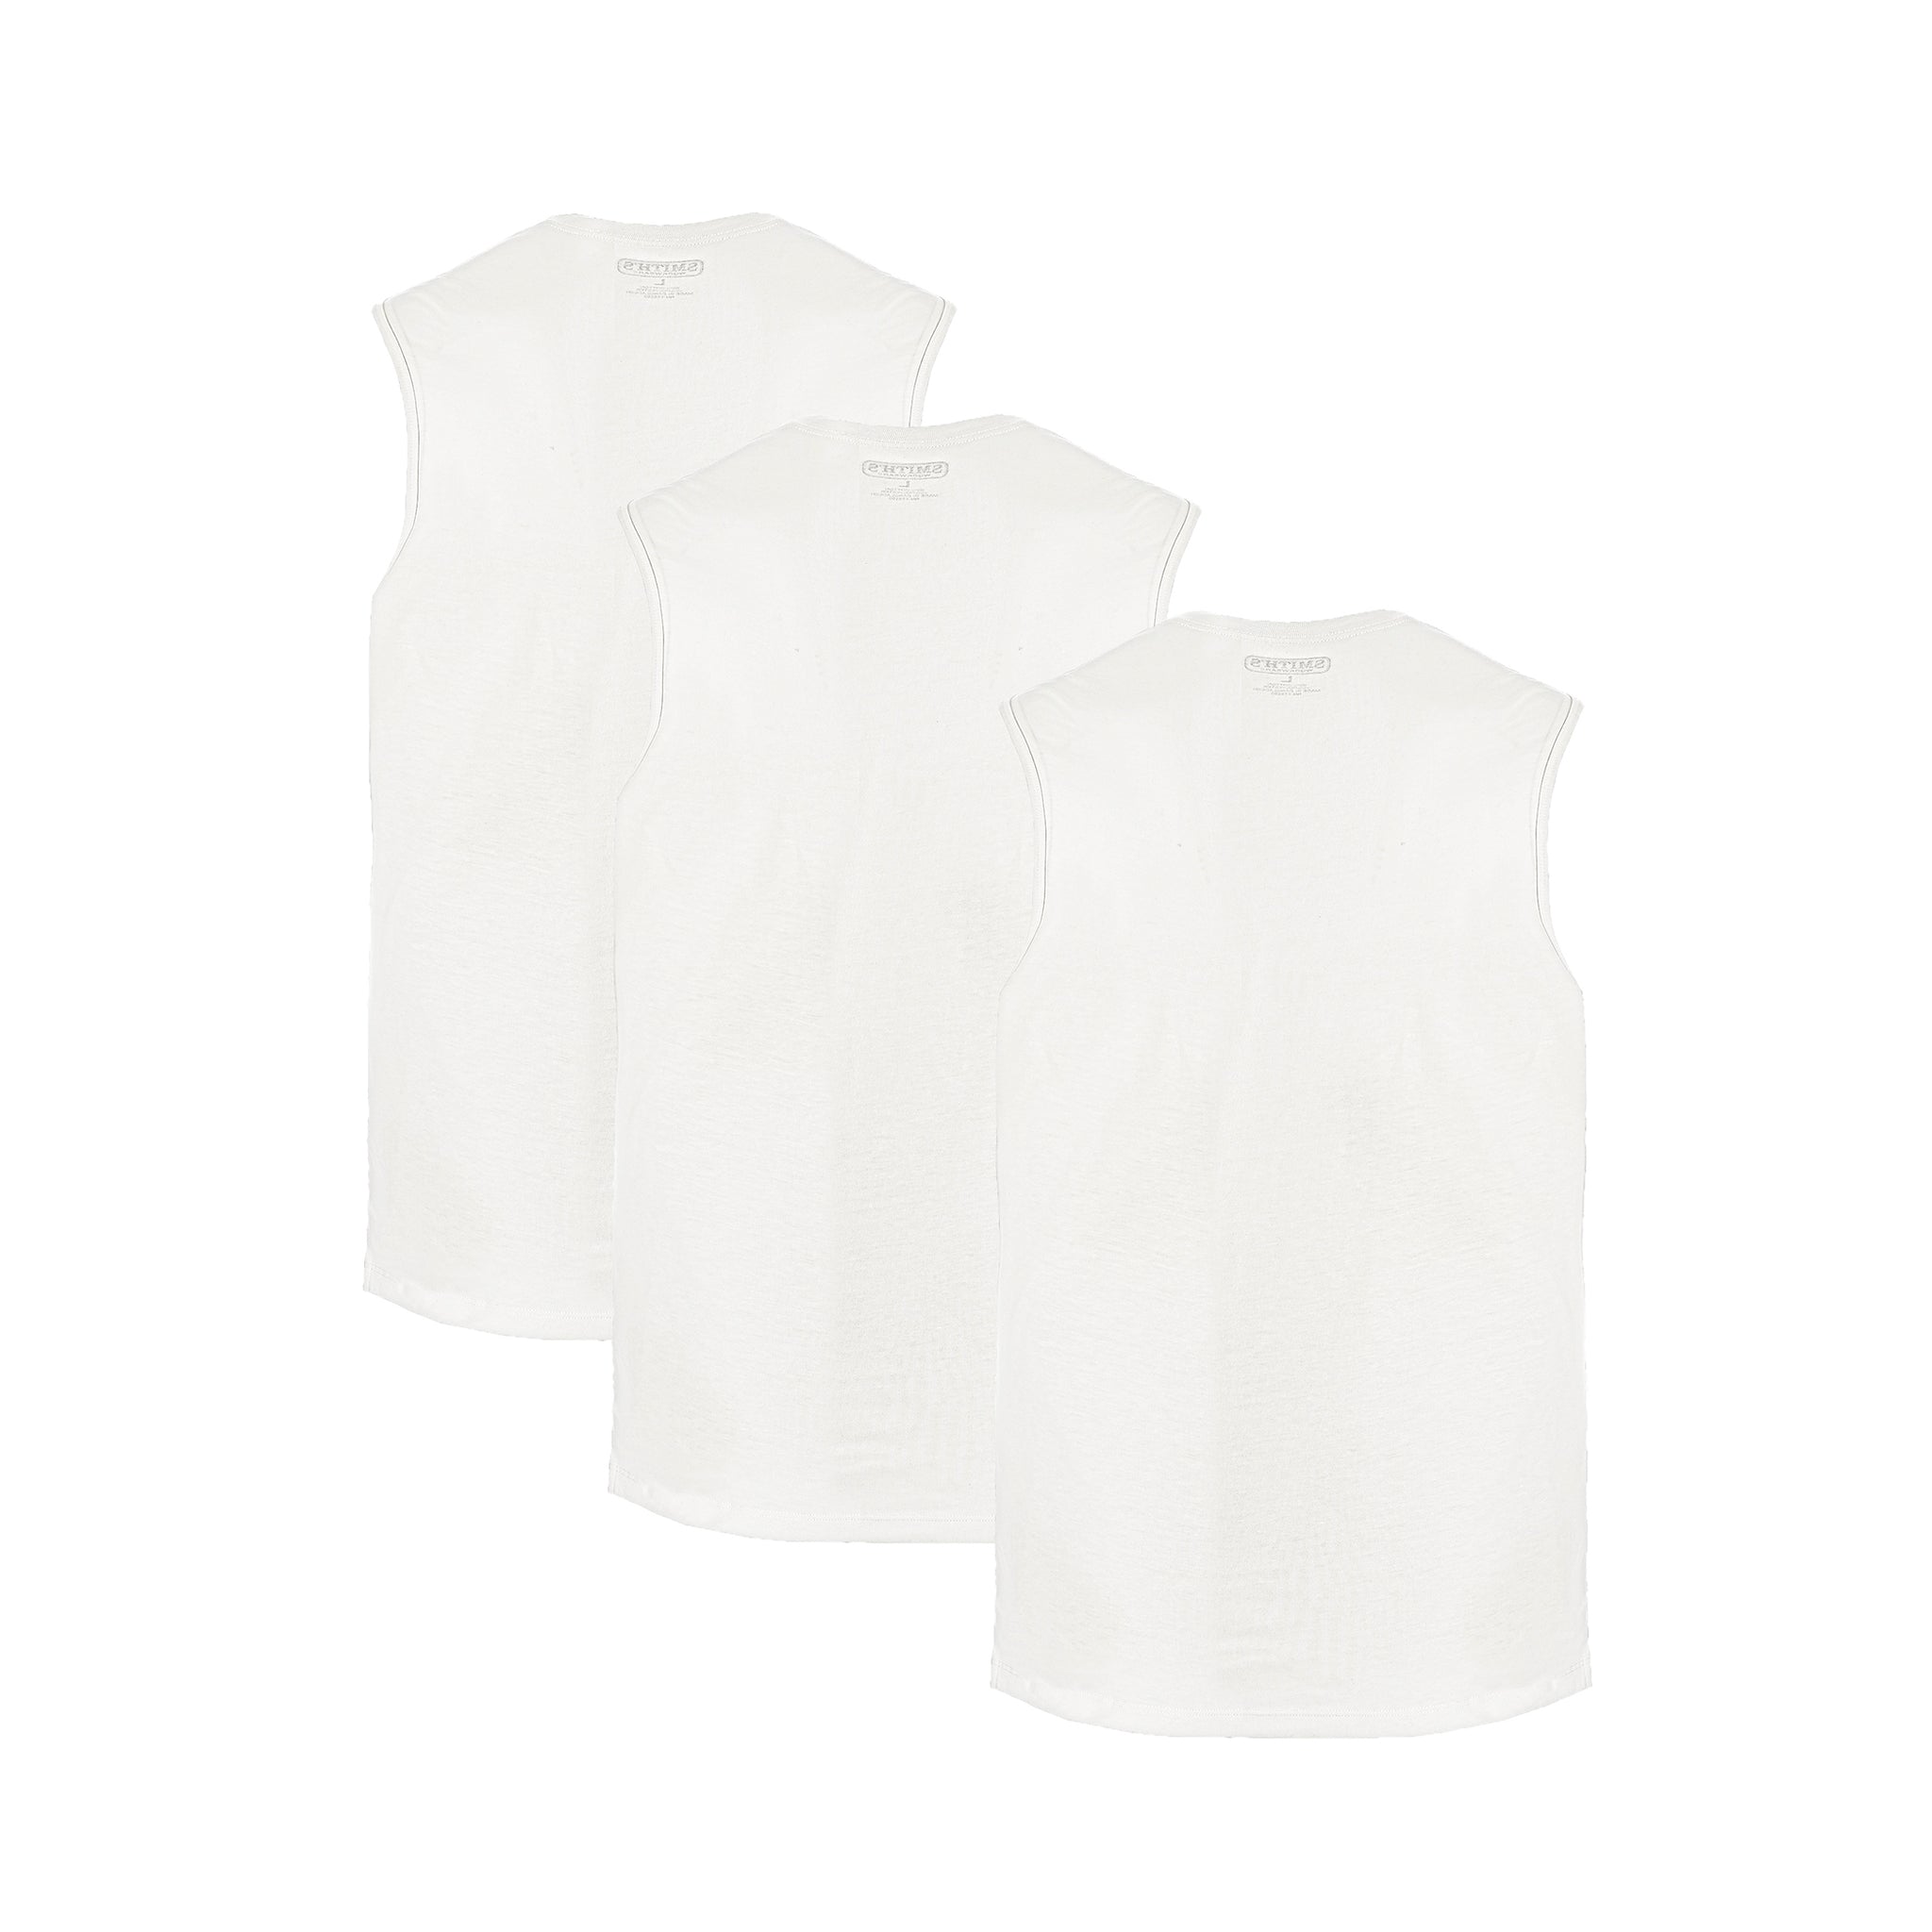 COTTON MUSCLE TEE 3-PACK